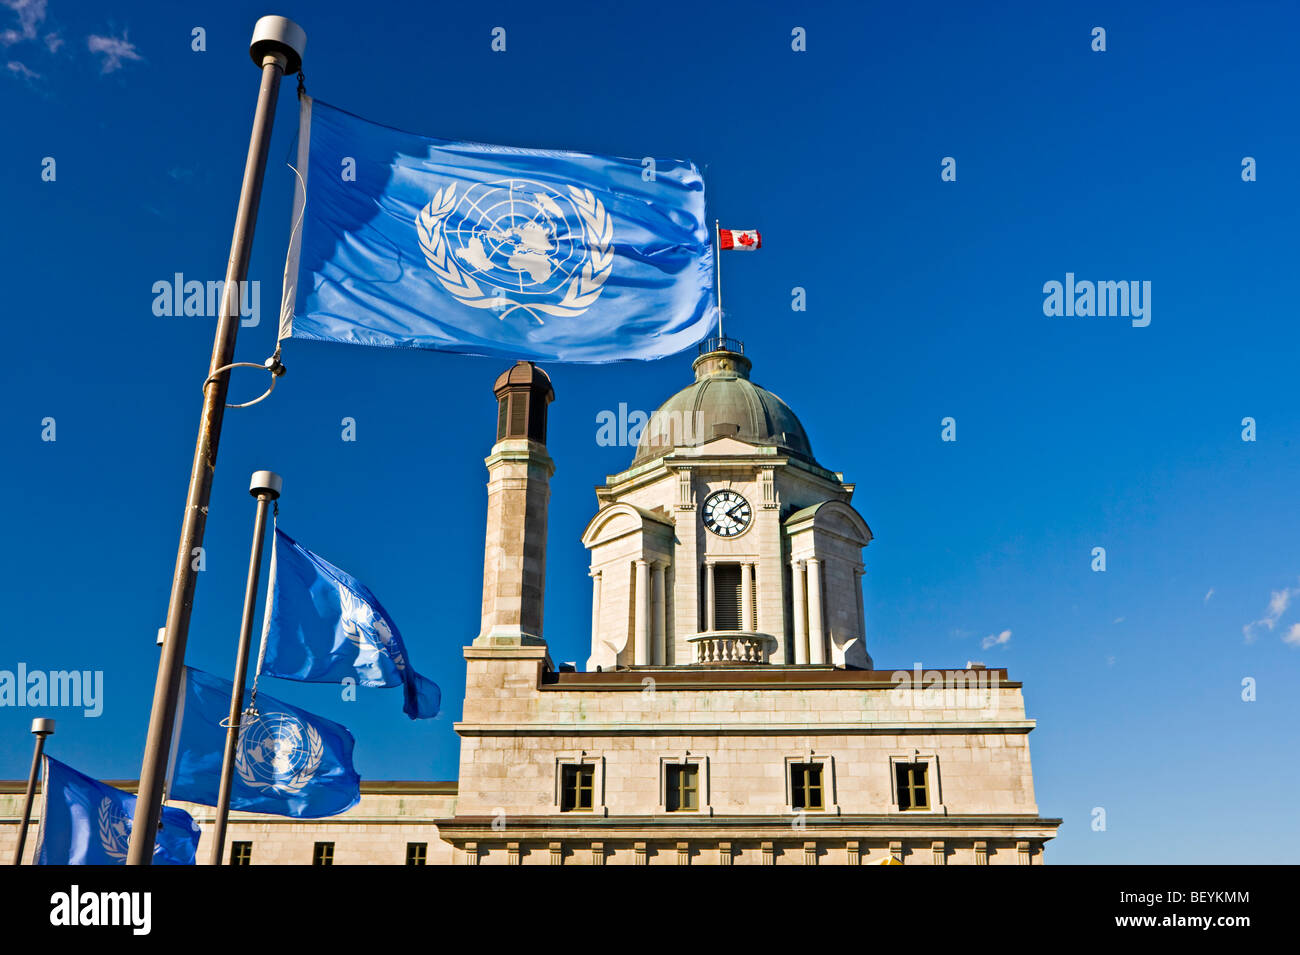 Clock Tower of old Post Office and flags in Old Quebec, Quebec City, Quebec, Canada. UNESCO World Heritage Site. Stock Photo